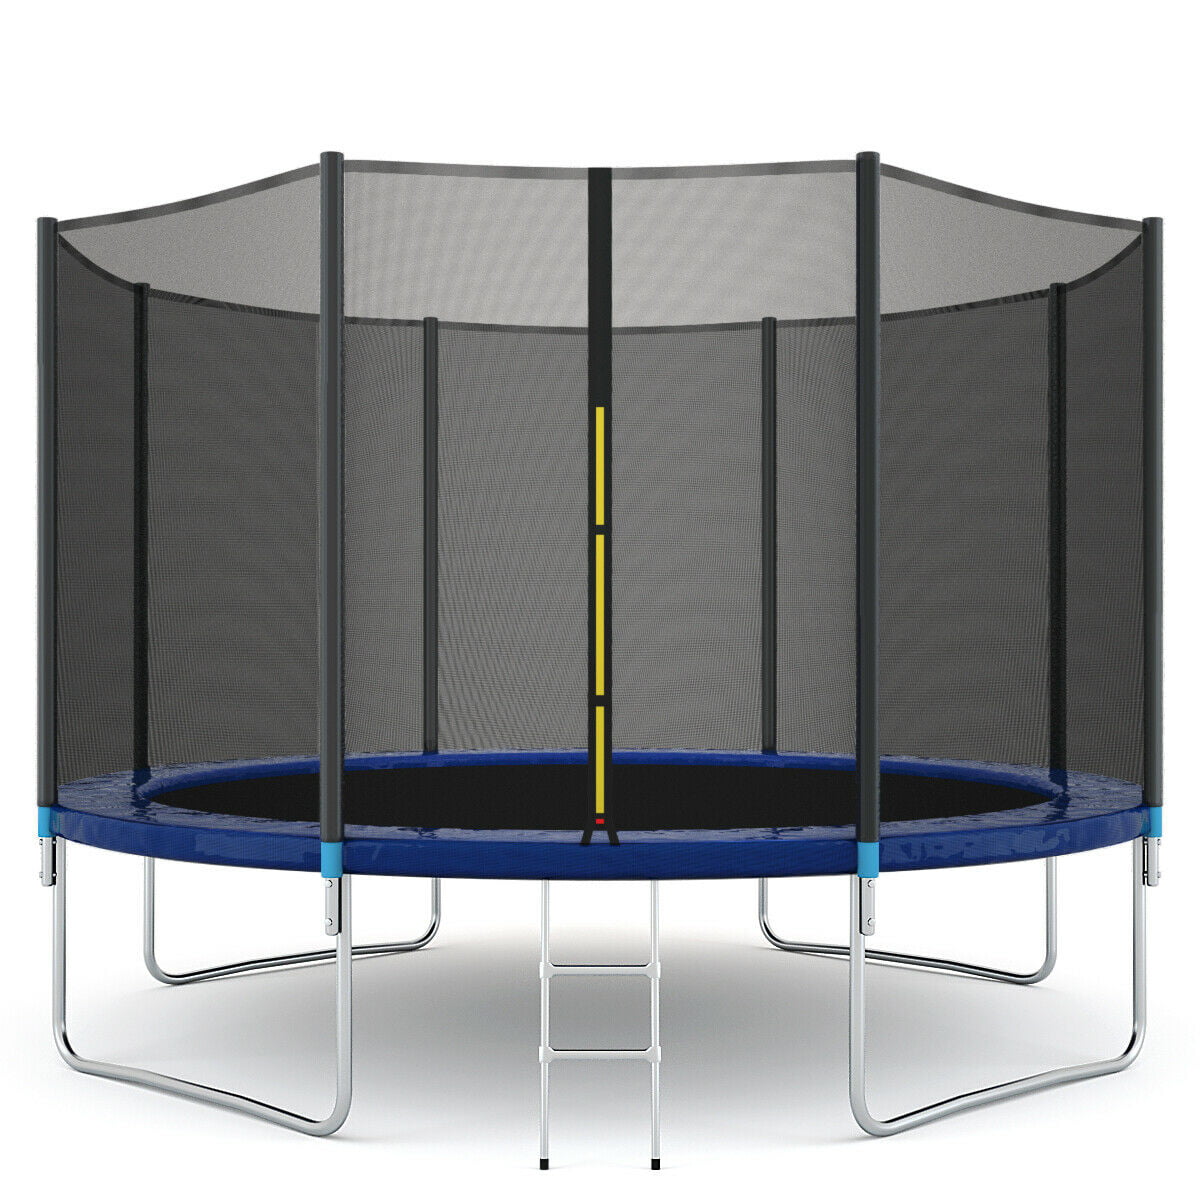 NEW 12FT Trampoline Combo Bounce Jump Safety Enclosure Net w/Spring Pad Ladder 